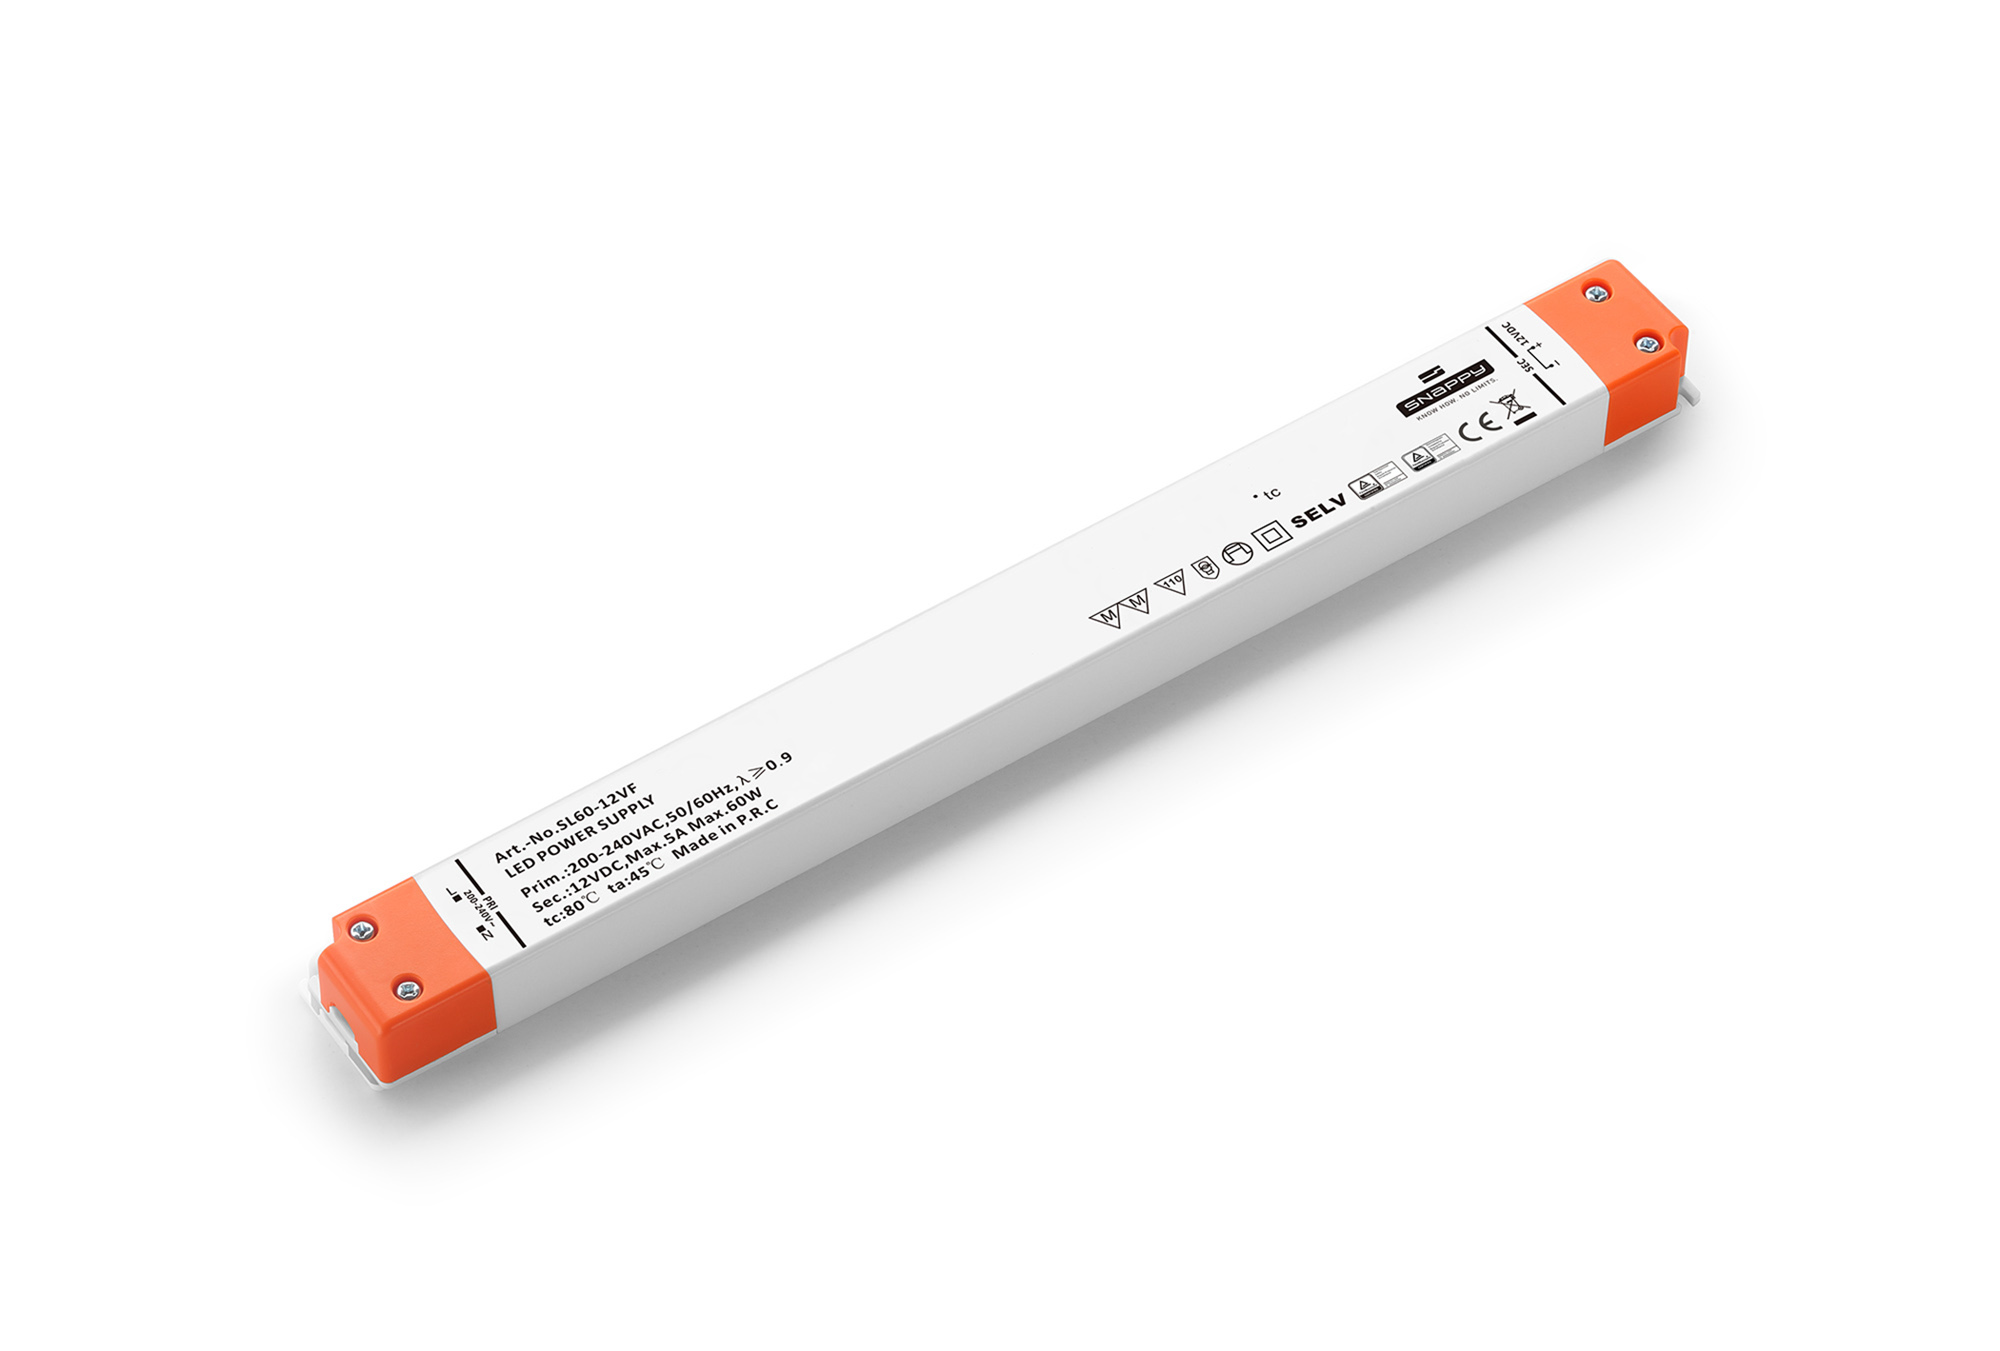 SL60-24VF  60W, Constant Voltage Non Dimmable LED Driver, 24VDC, 2.5A, Input 200-240VAC 50/60Hz, IP20.